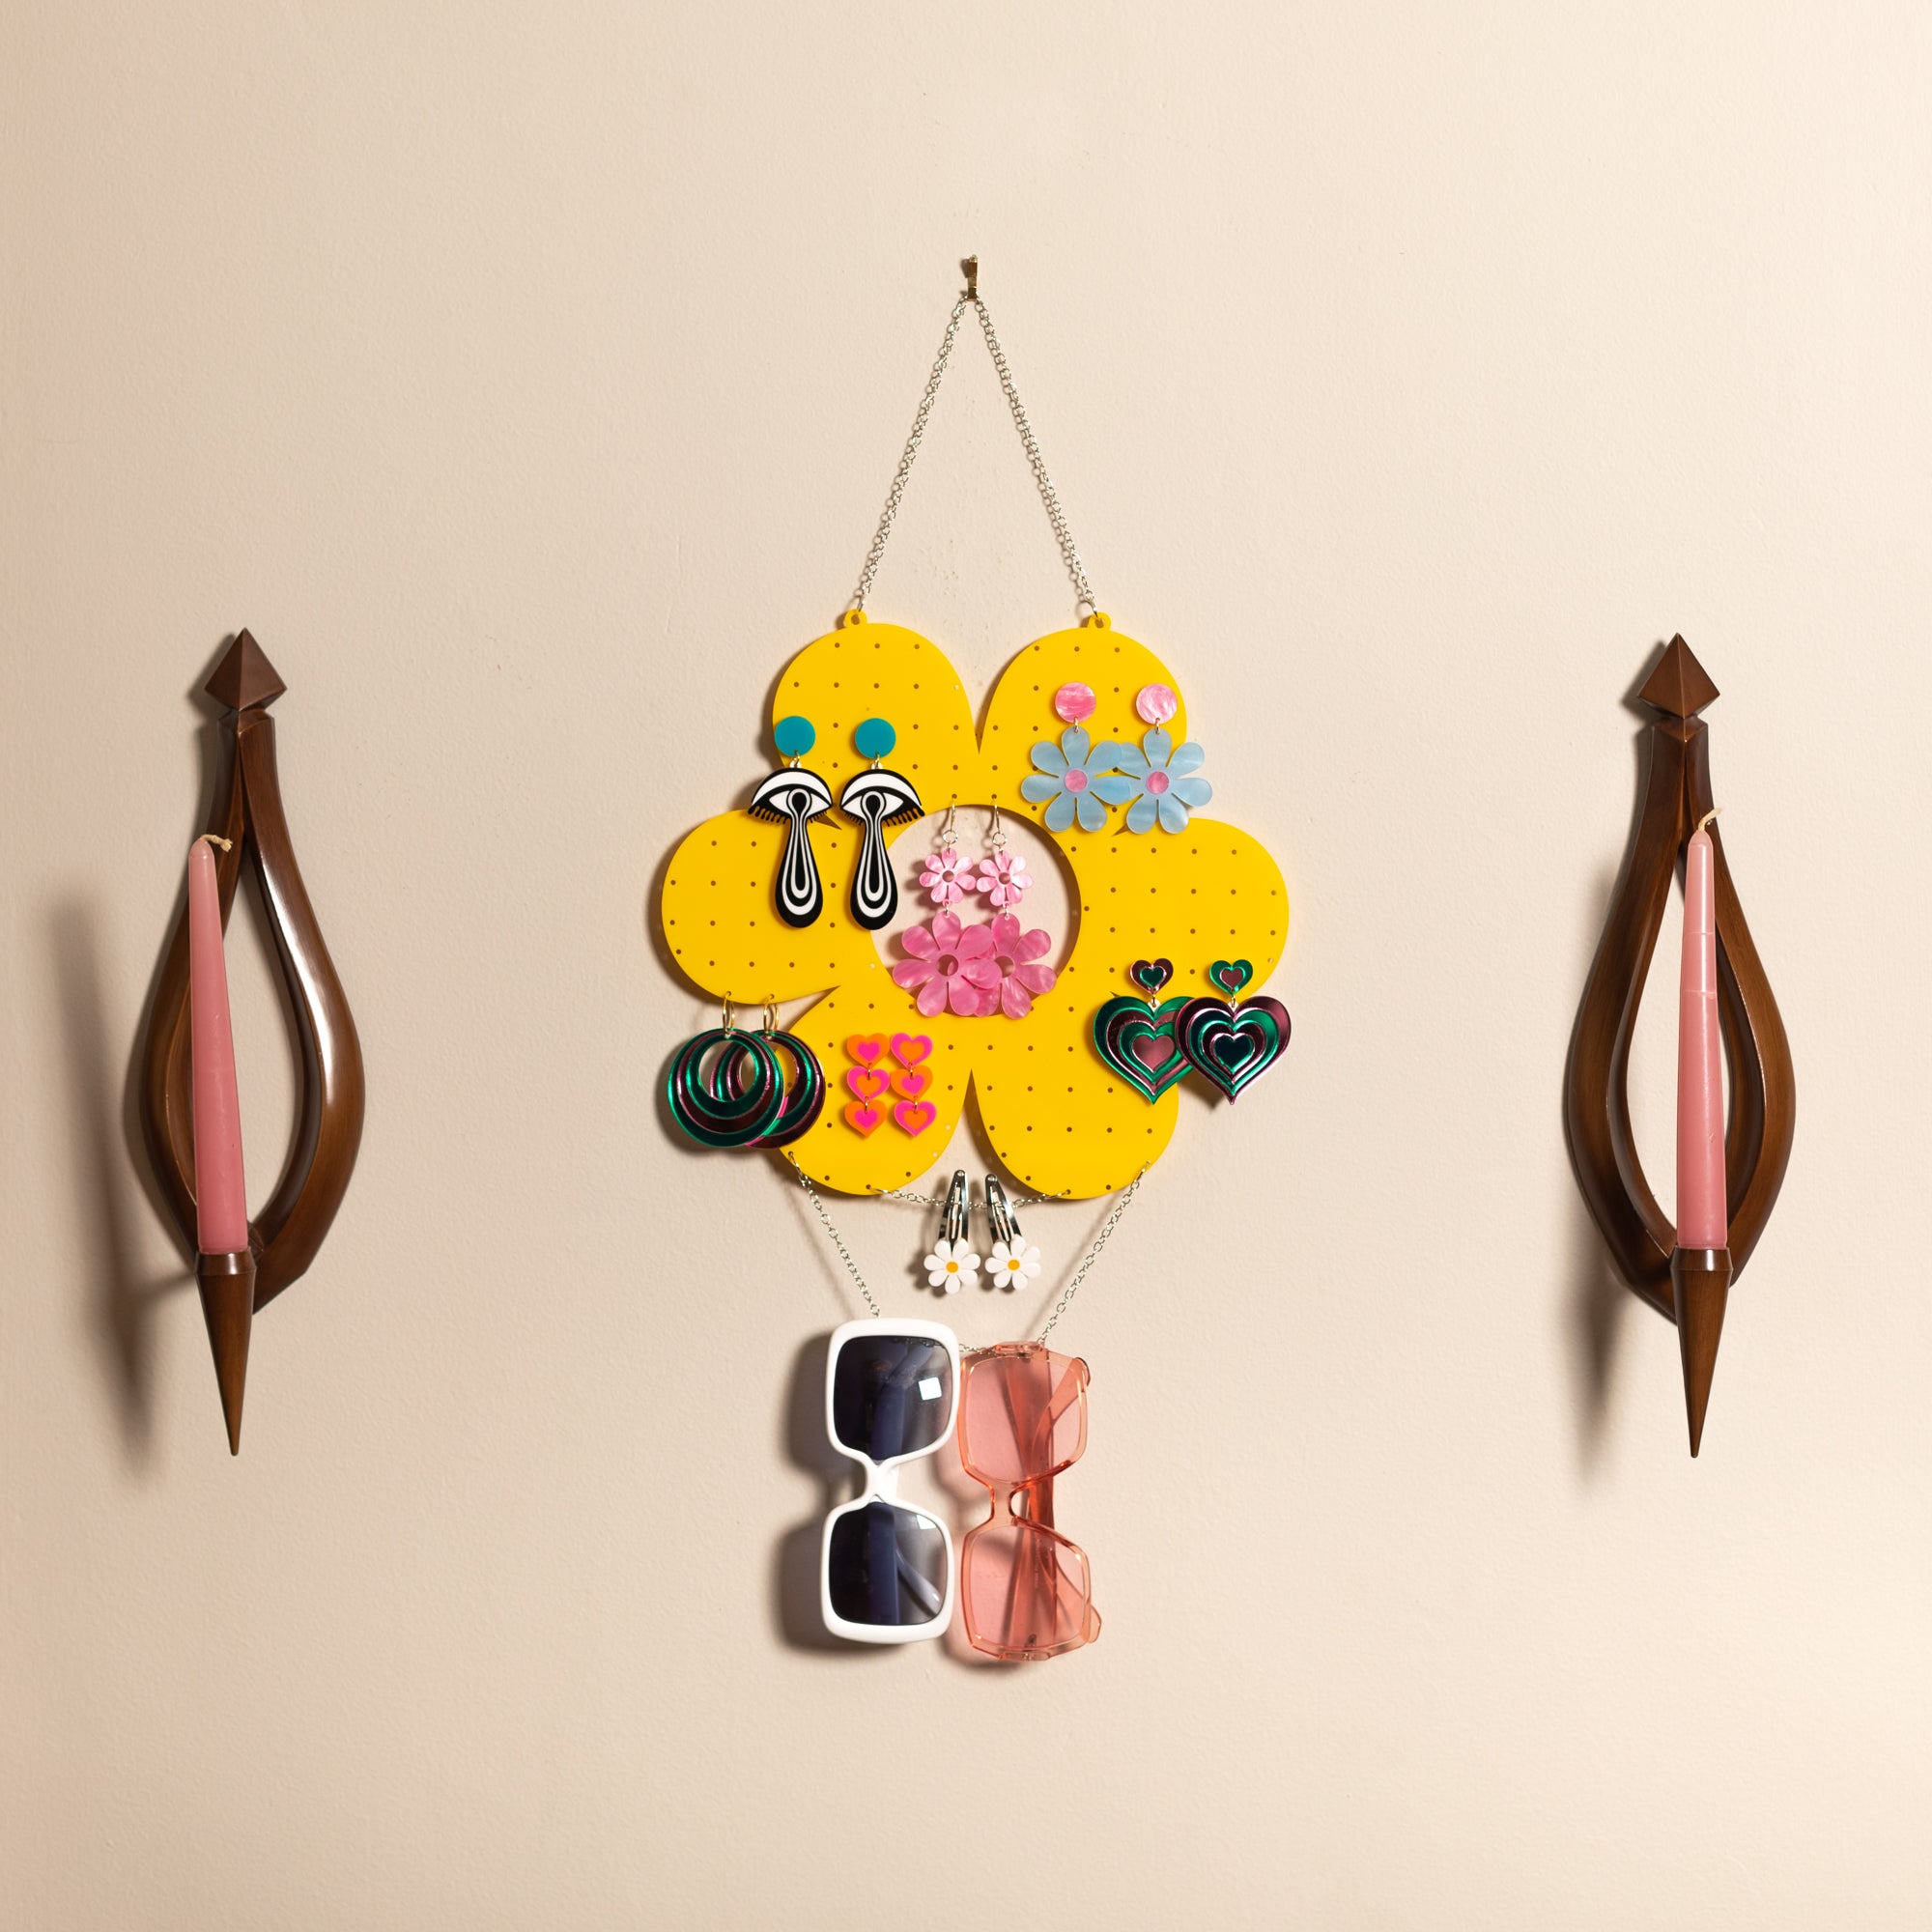 The Hanging Daisy Earring Display